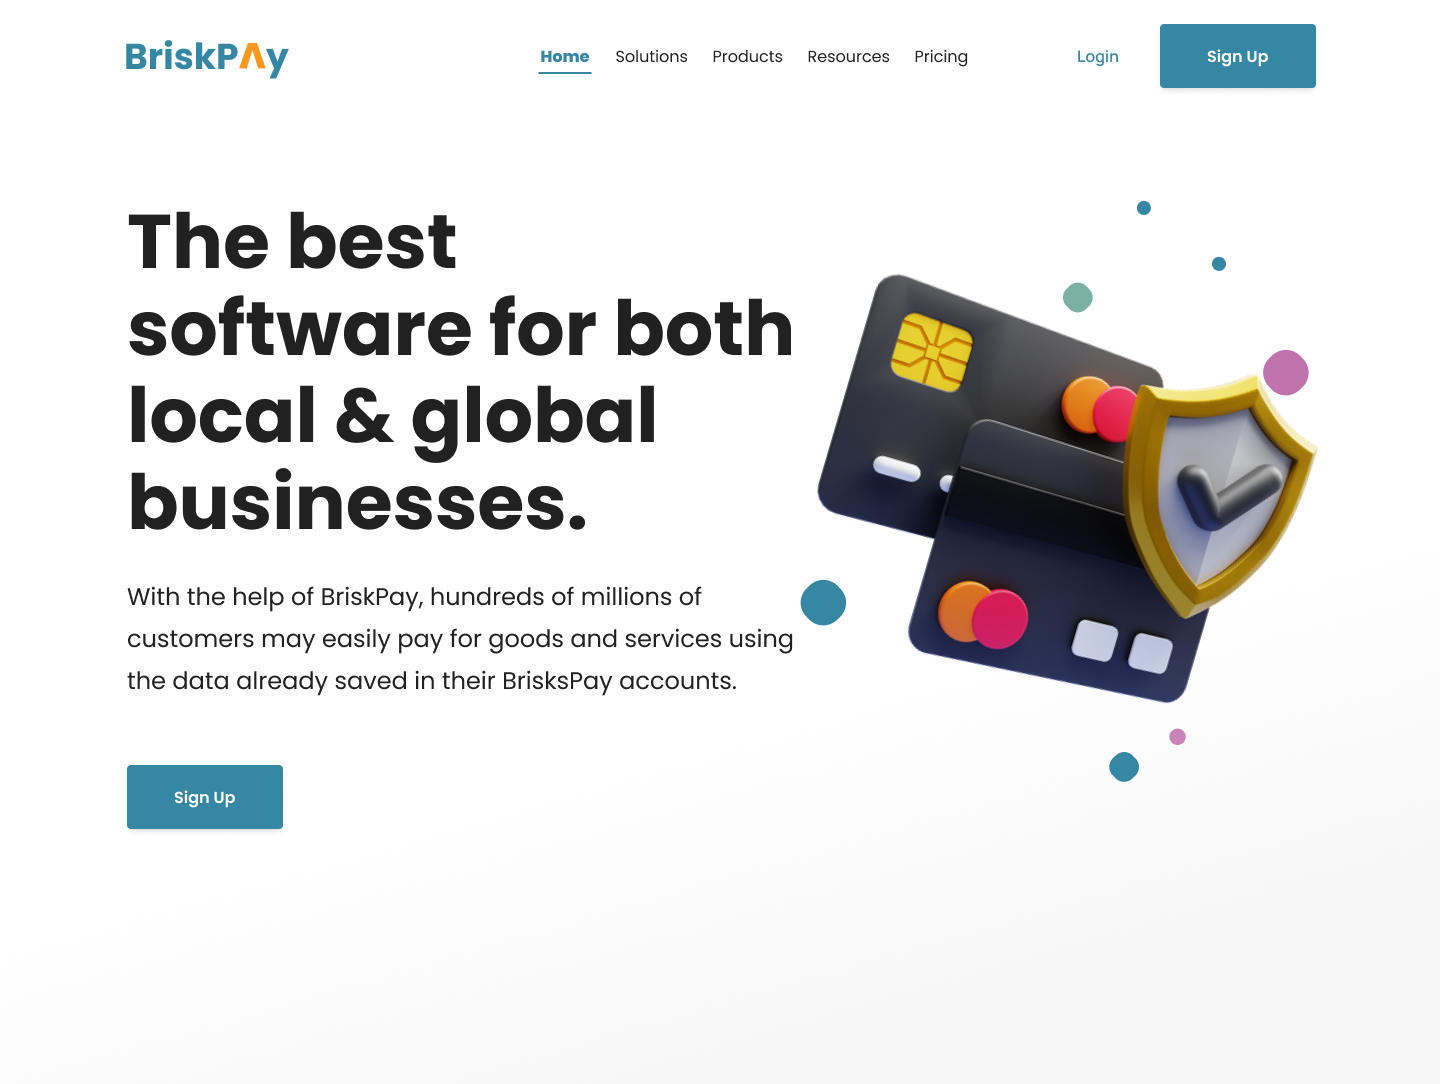 This was for a hackathon competition. With the help of BriskPay, hundreds of millions of customers may easily pay for goods and services using the data already saved in their BrisksPay accounts.